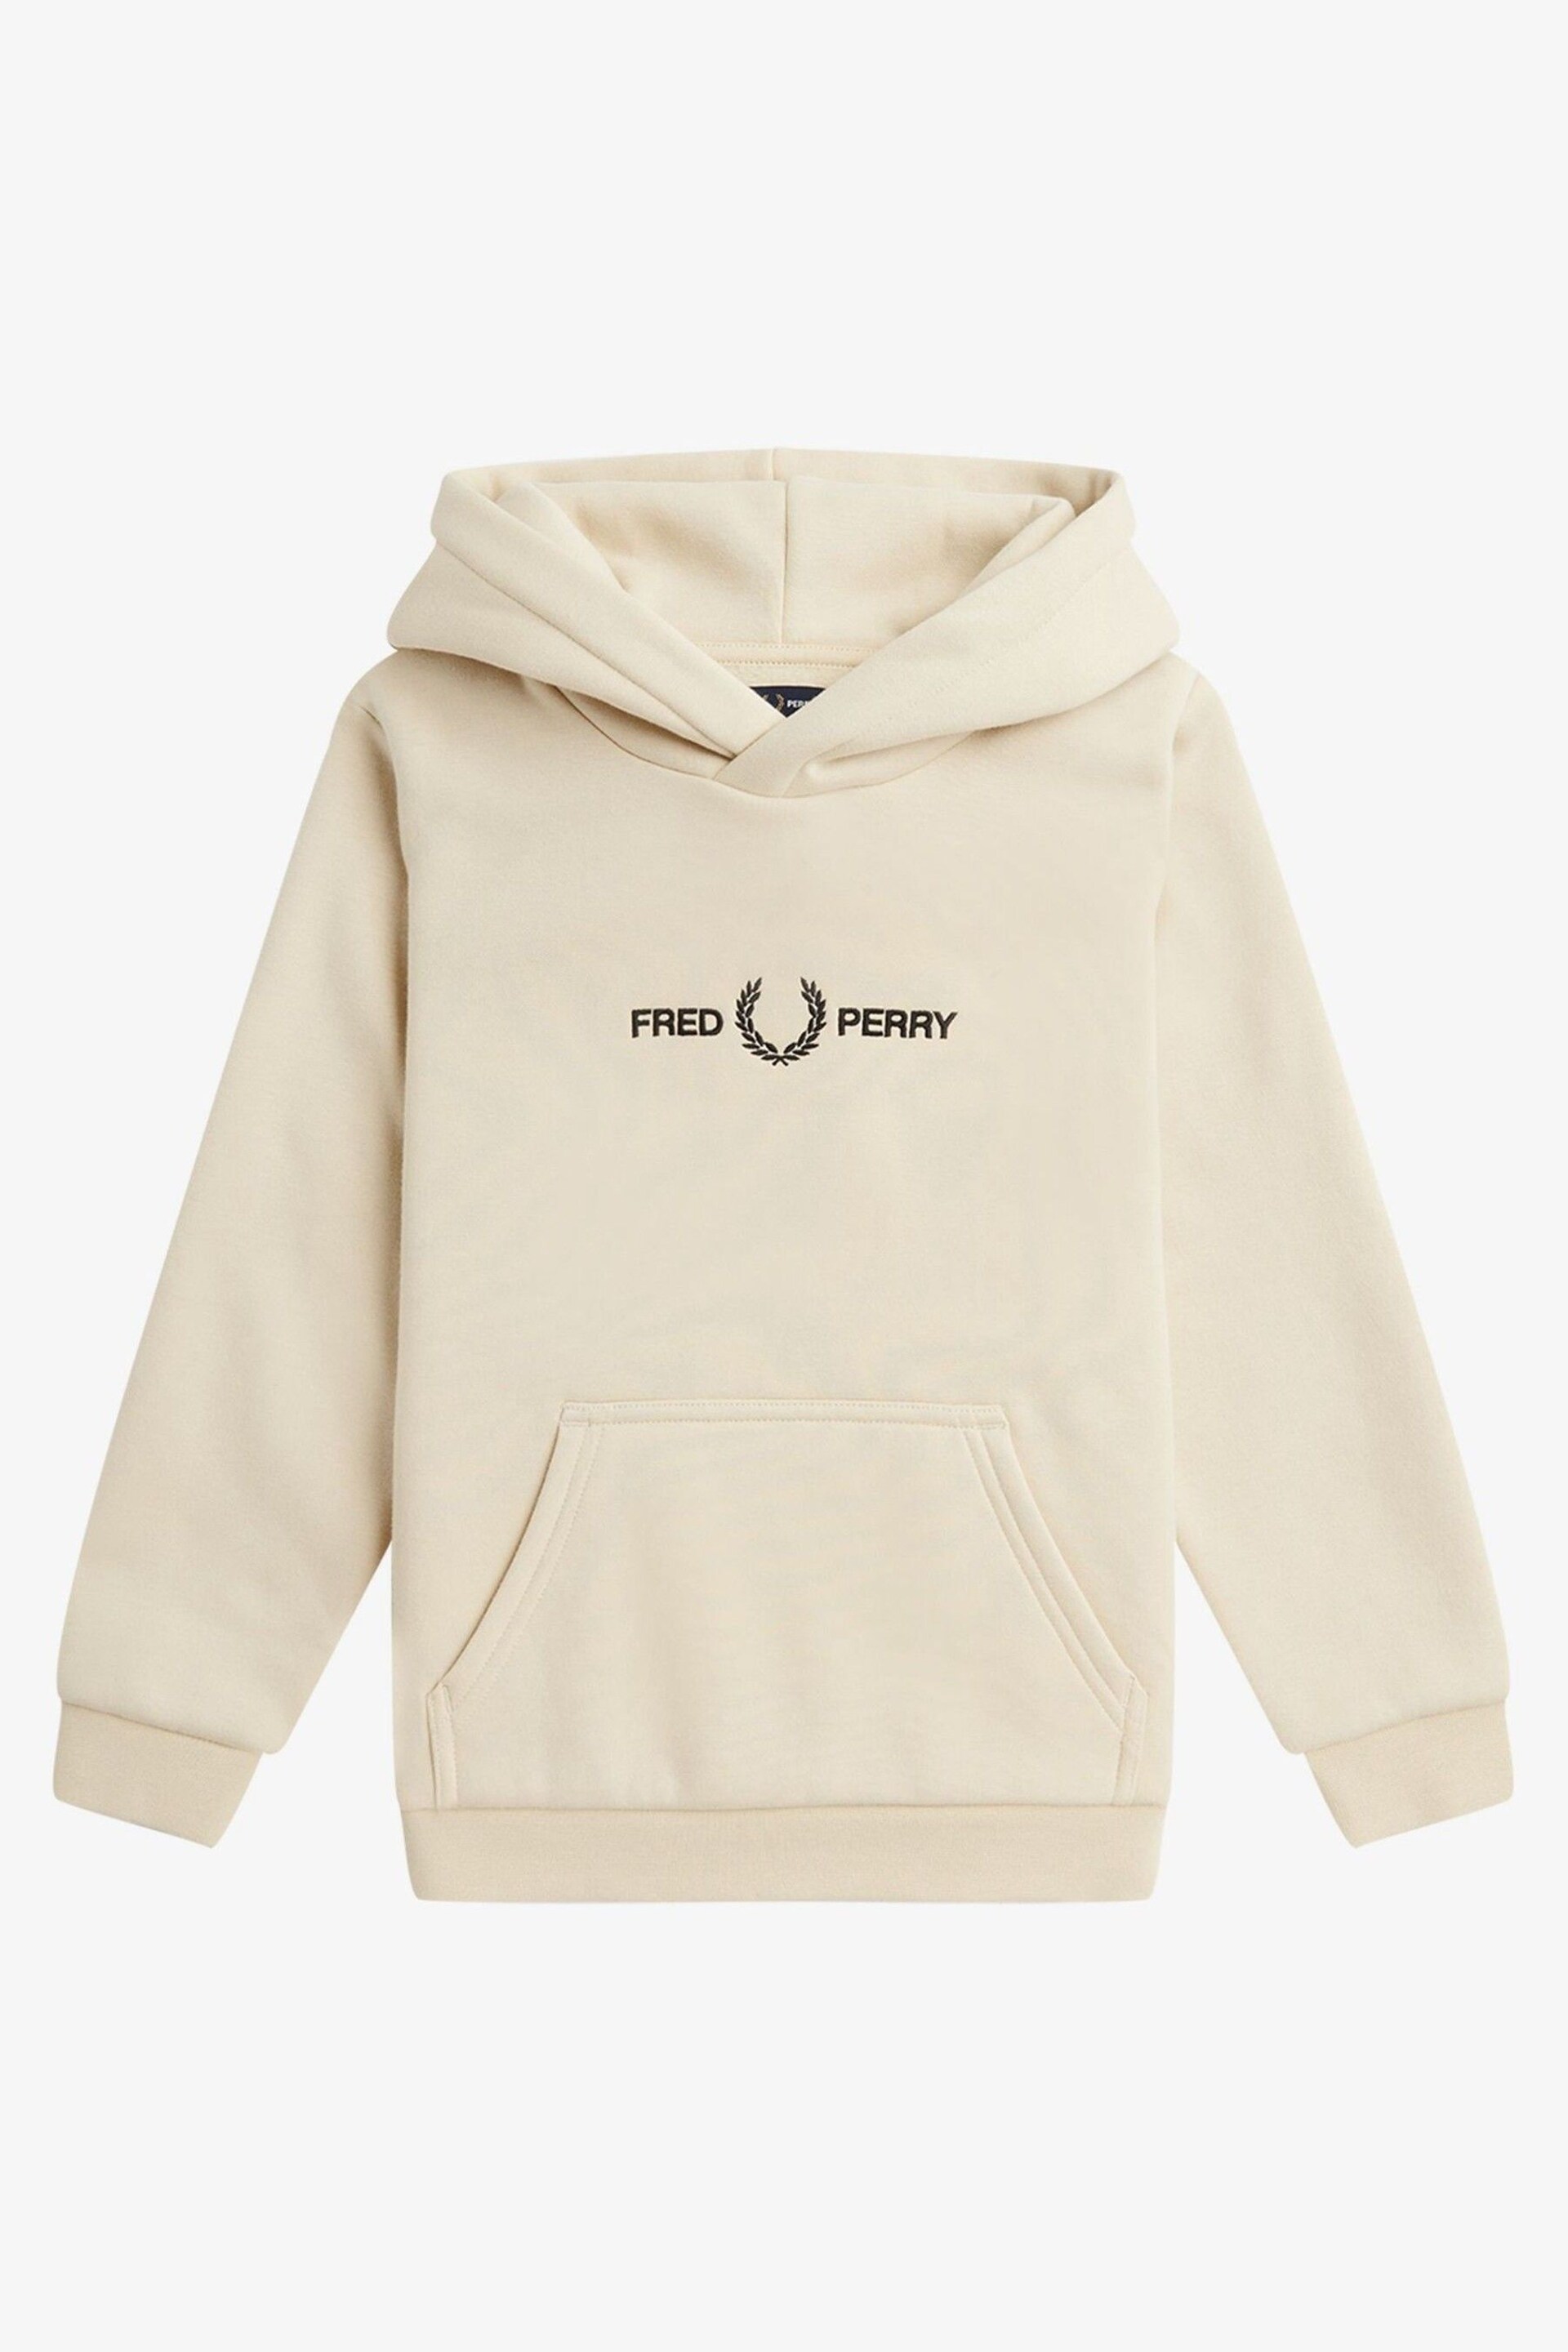 Fred Perry Kids Back Graphic Hoodie - Image 1 of 3